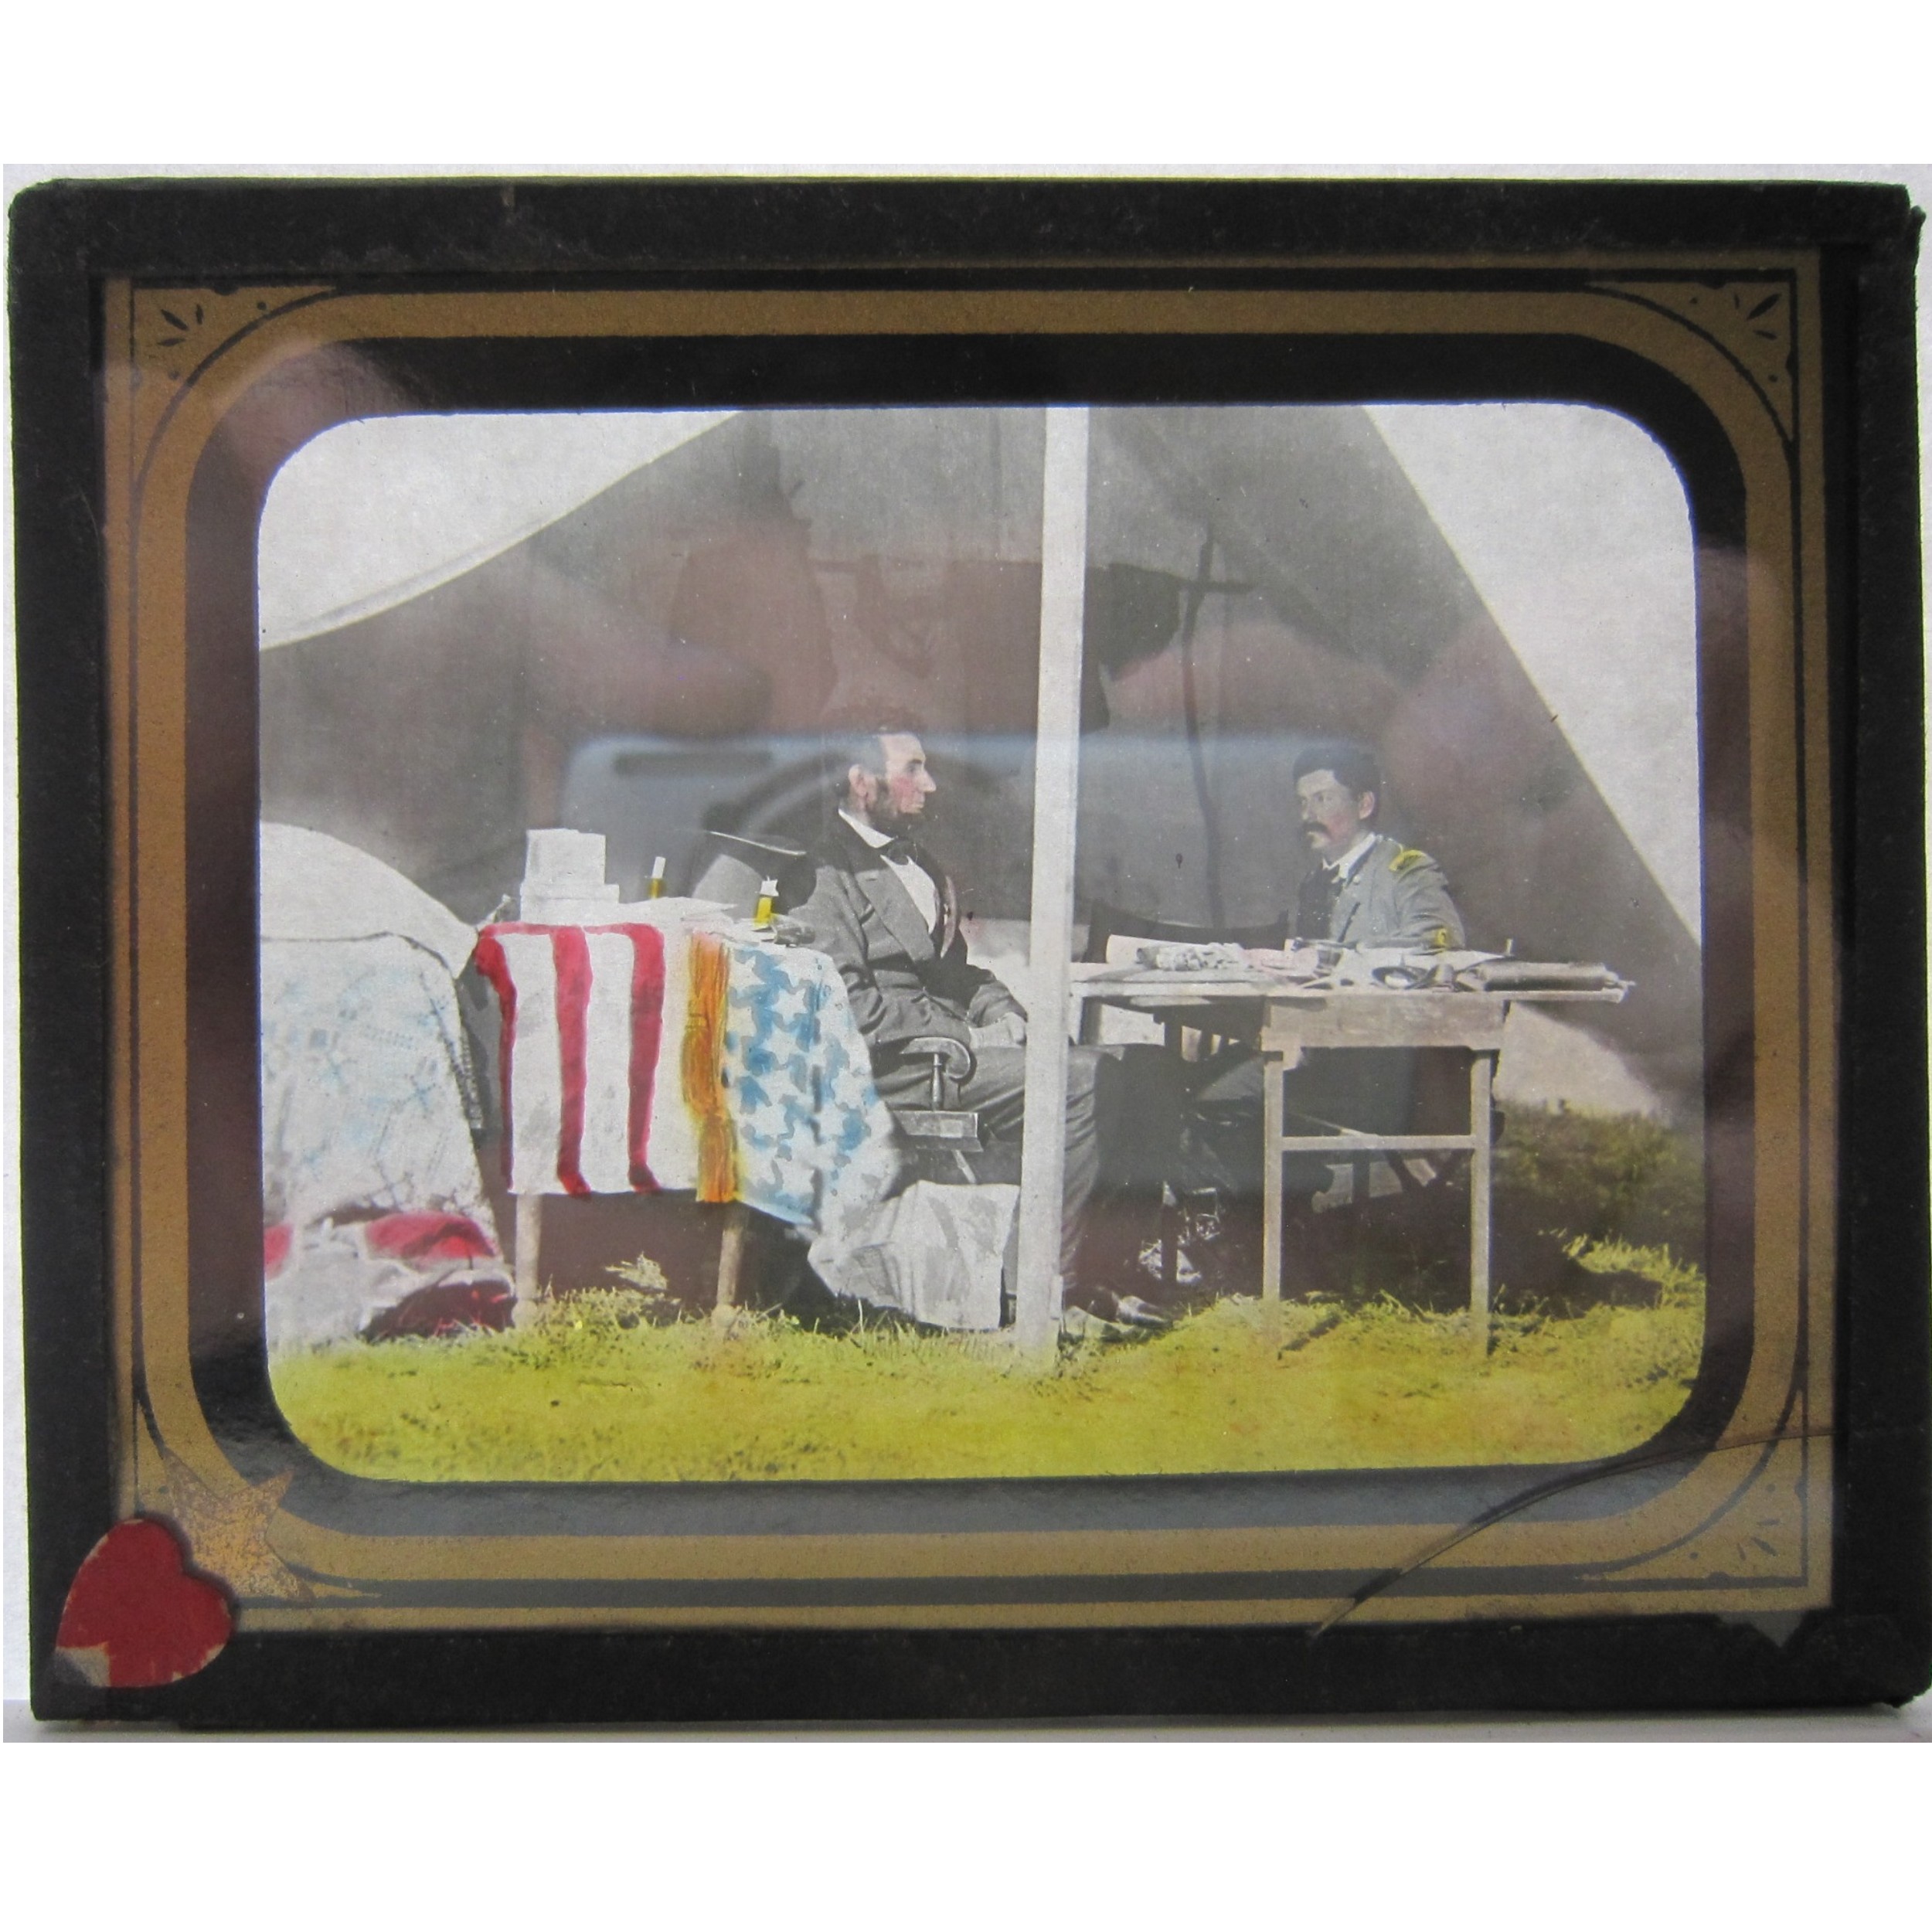 Glass slide of President Abraham Lincoln & Gen. McClellan in the general’s tent. Antietam, Maryland. October 3rd, 1862